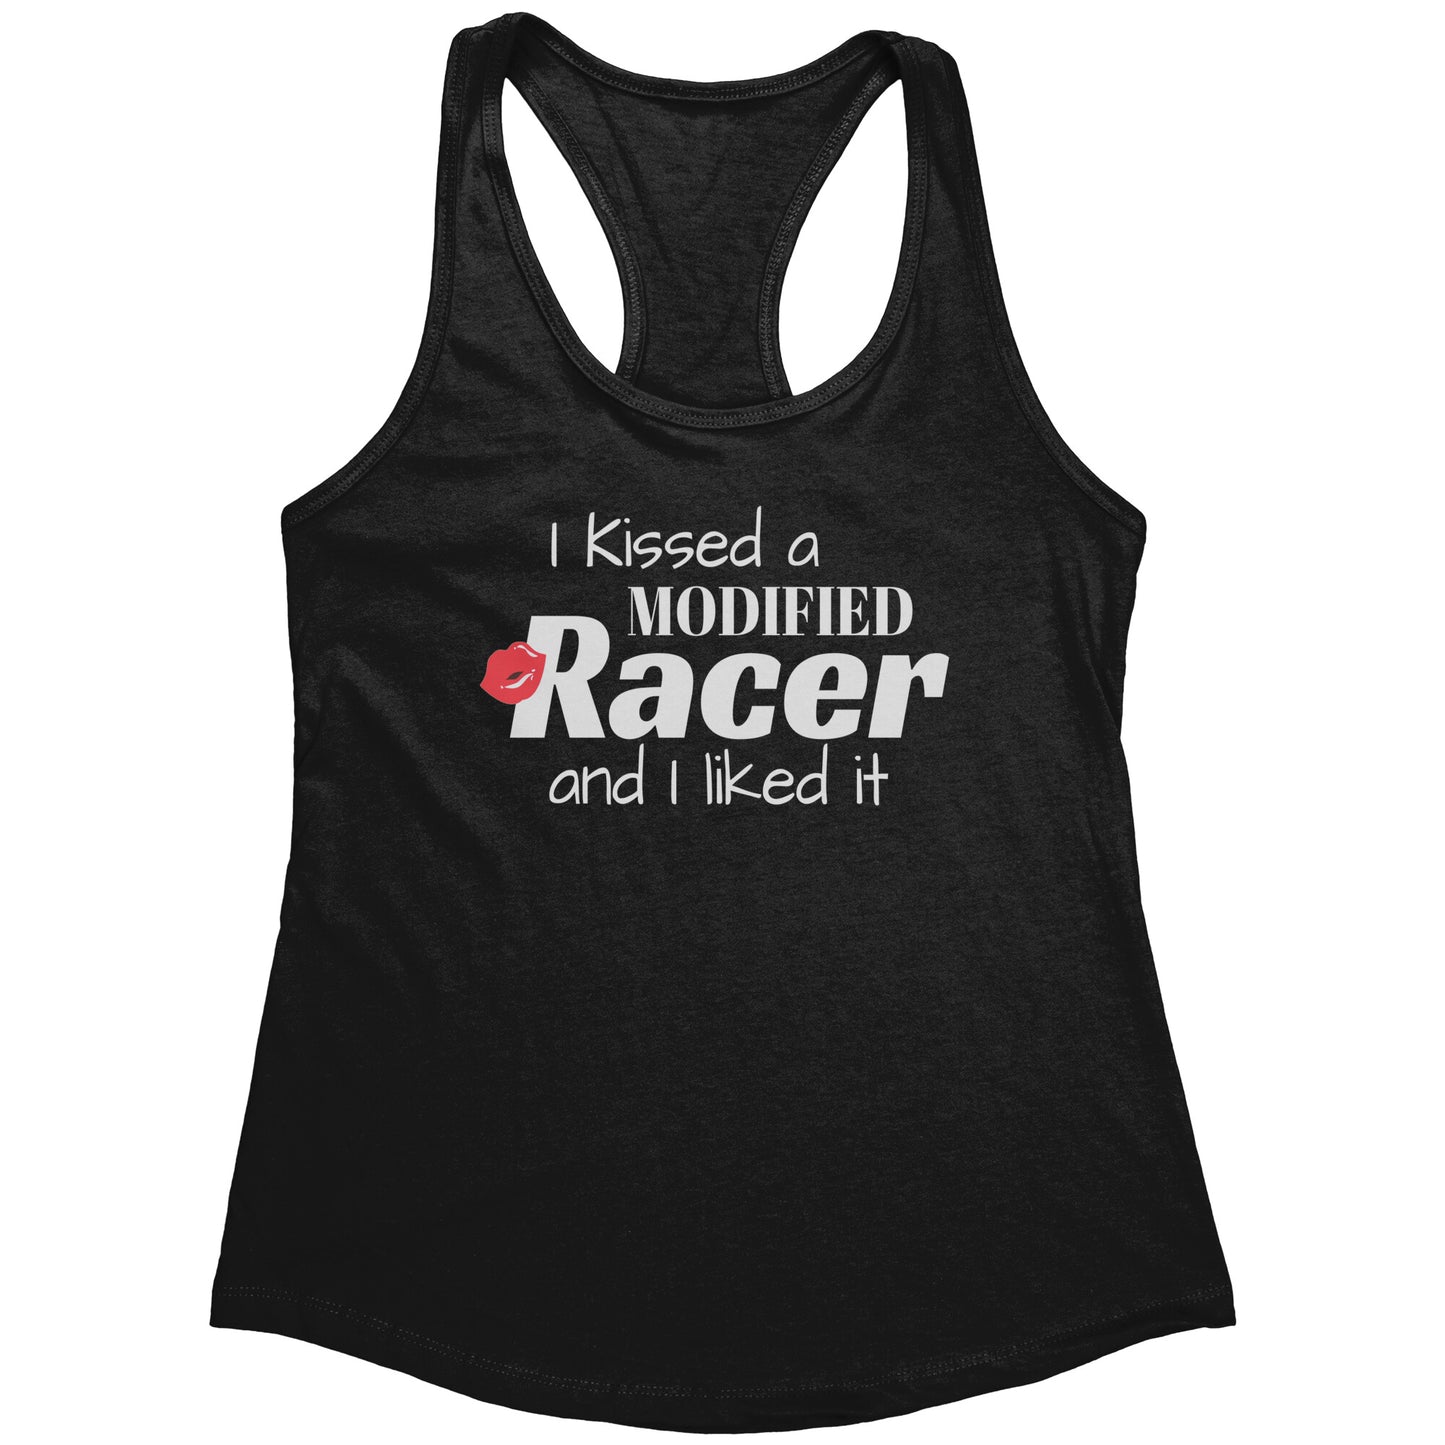 I KISSED A MODIFIED RACER AND I LIKED IT WOMEN TANK TOP